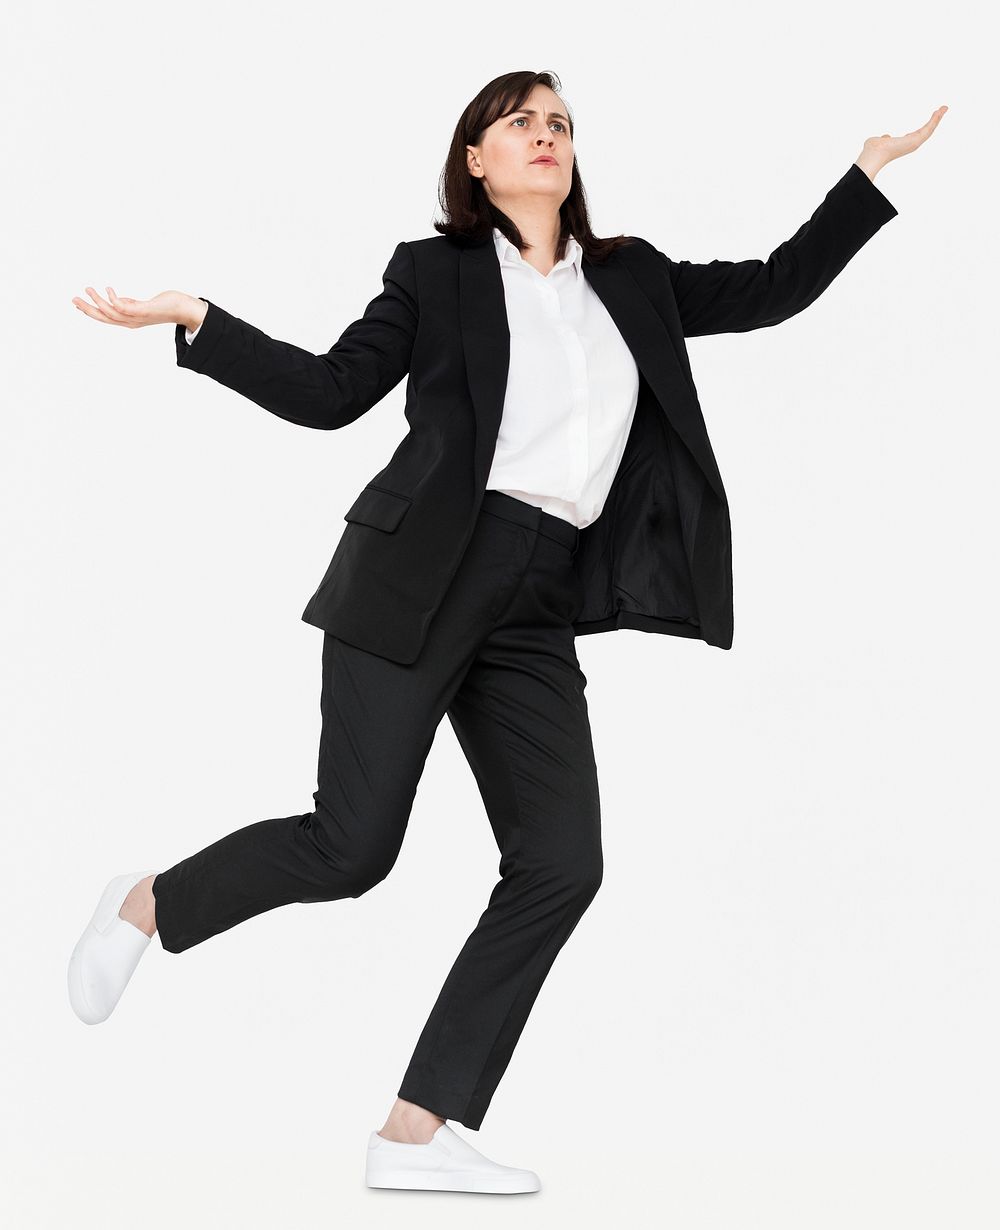 Confused young woman balancing herself on one leg